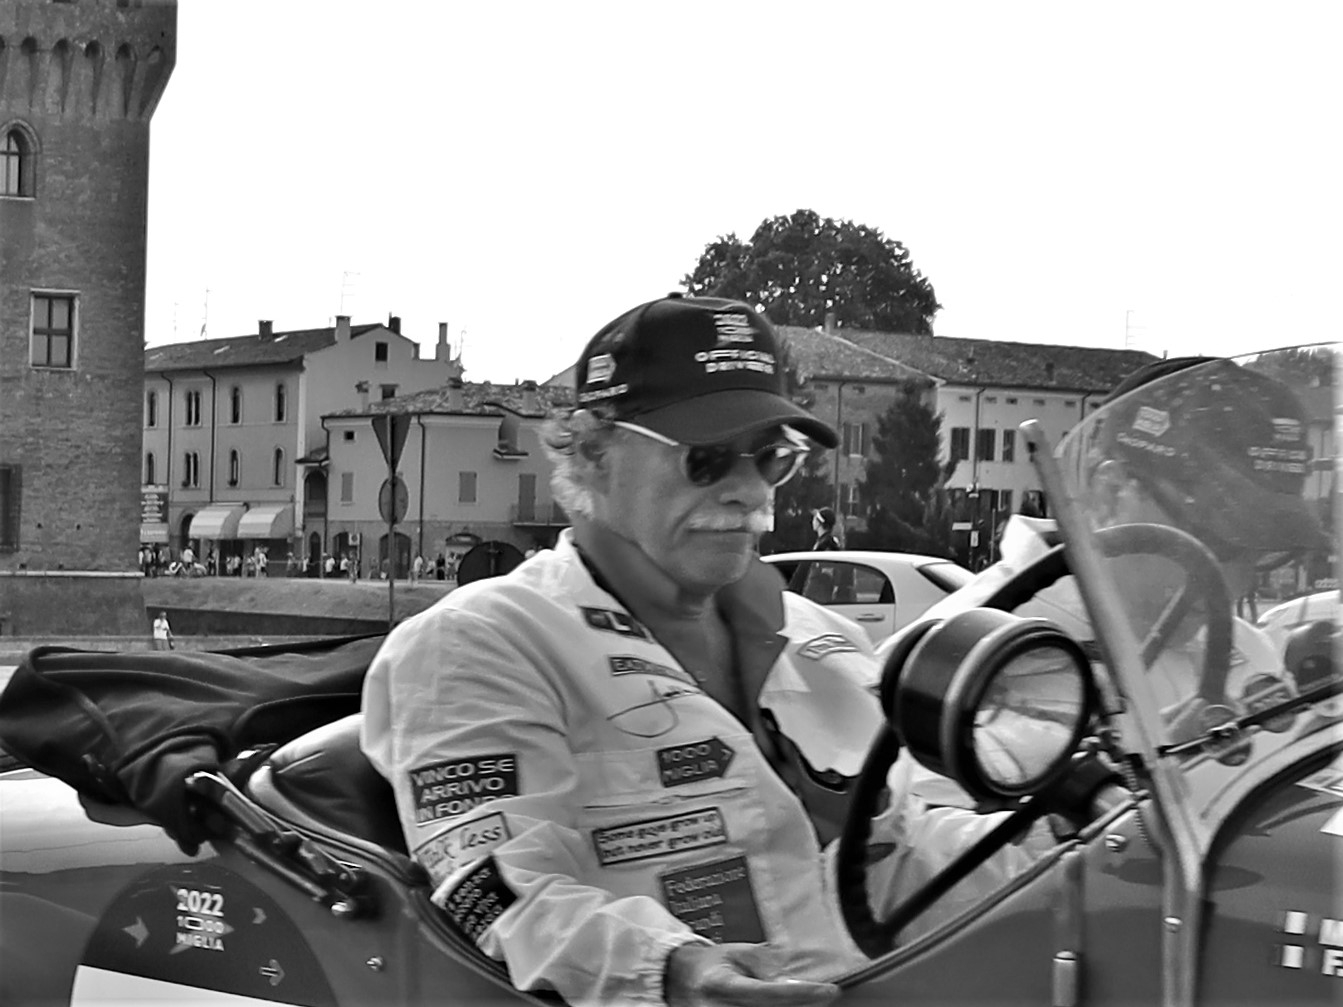 Faces from MilleMiglia 2022...